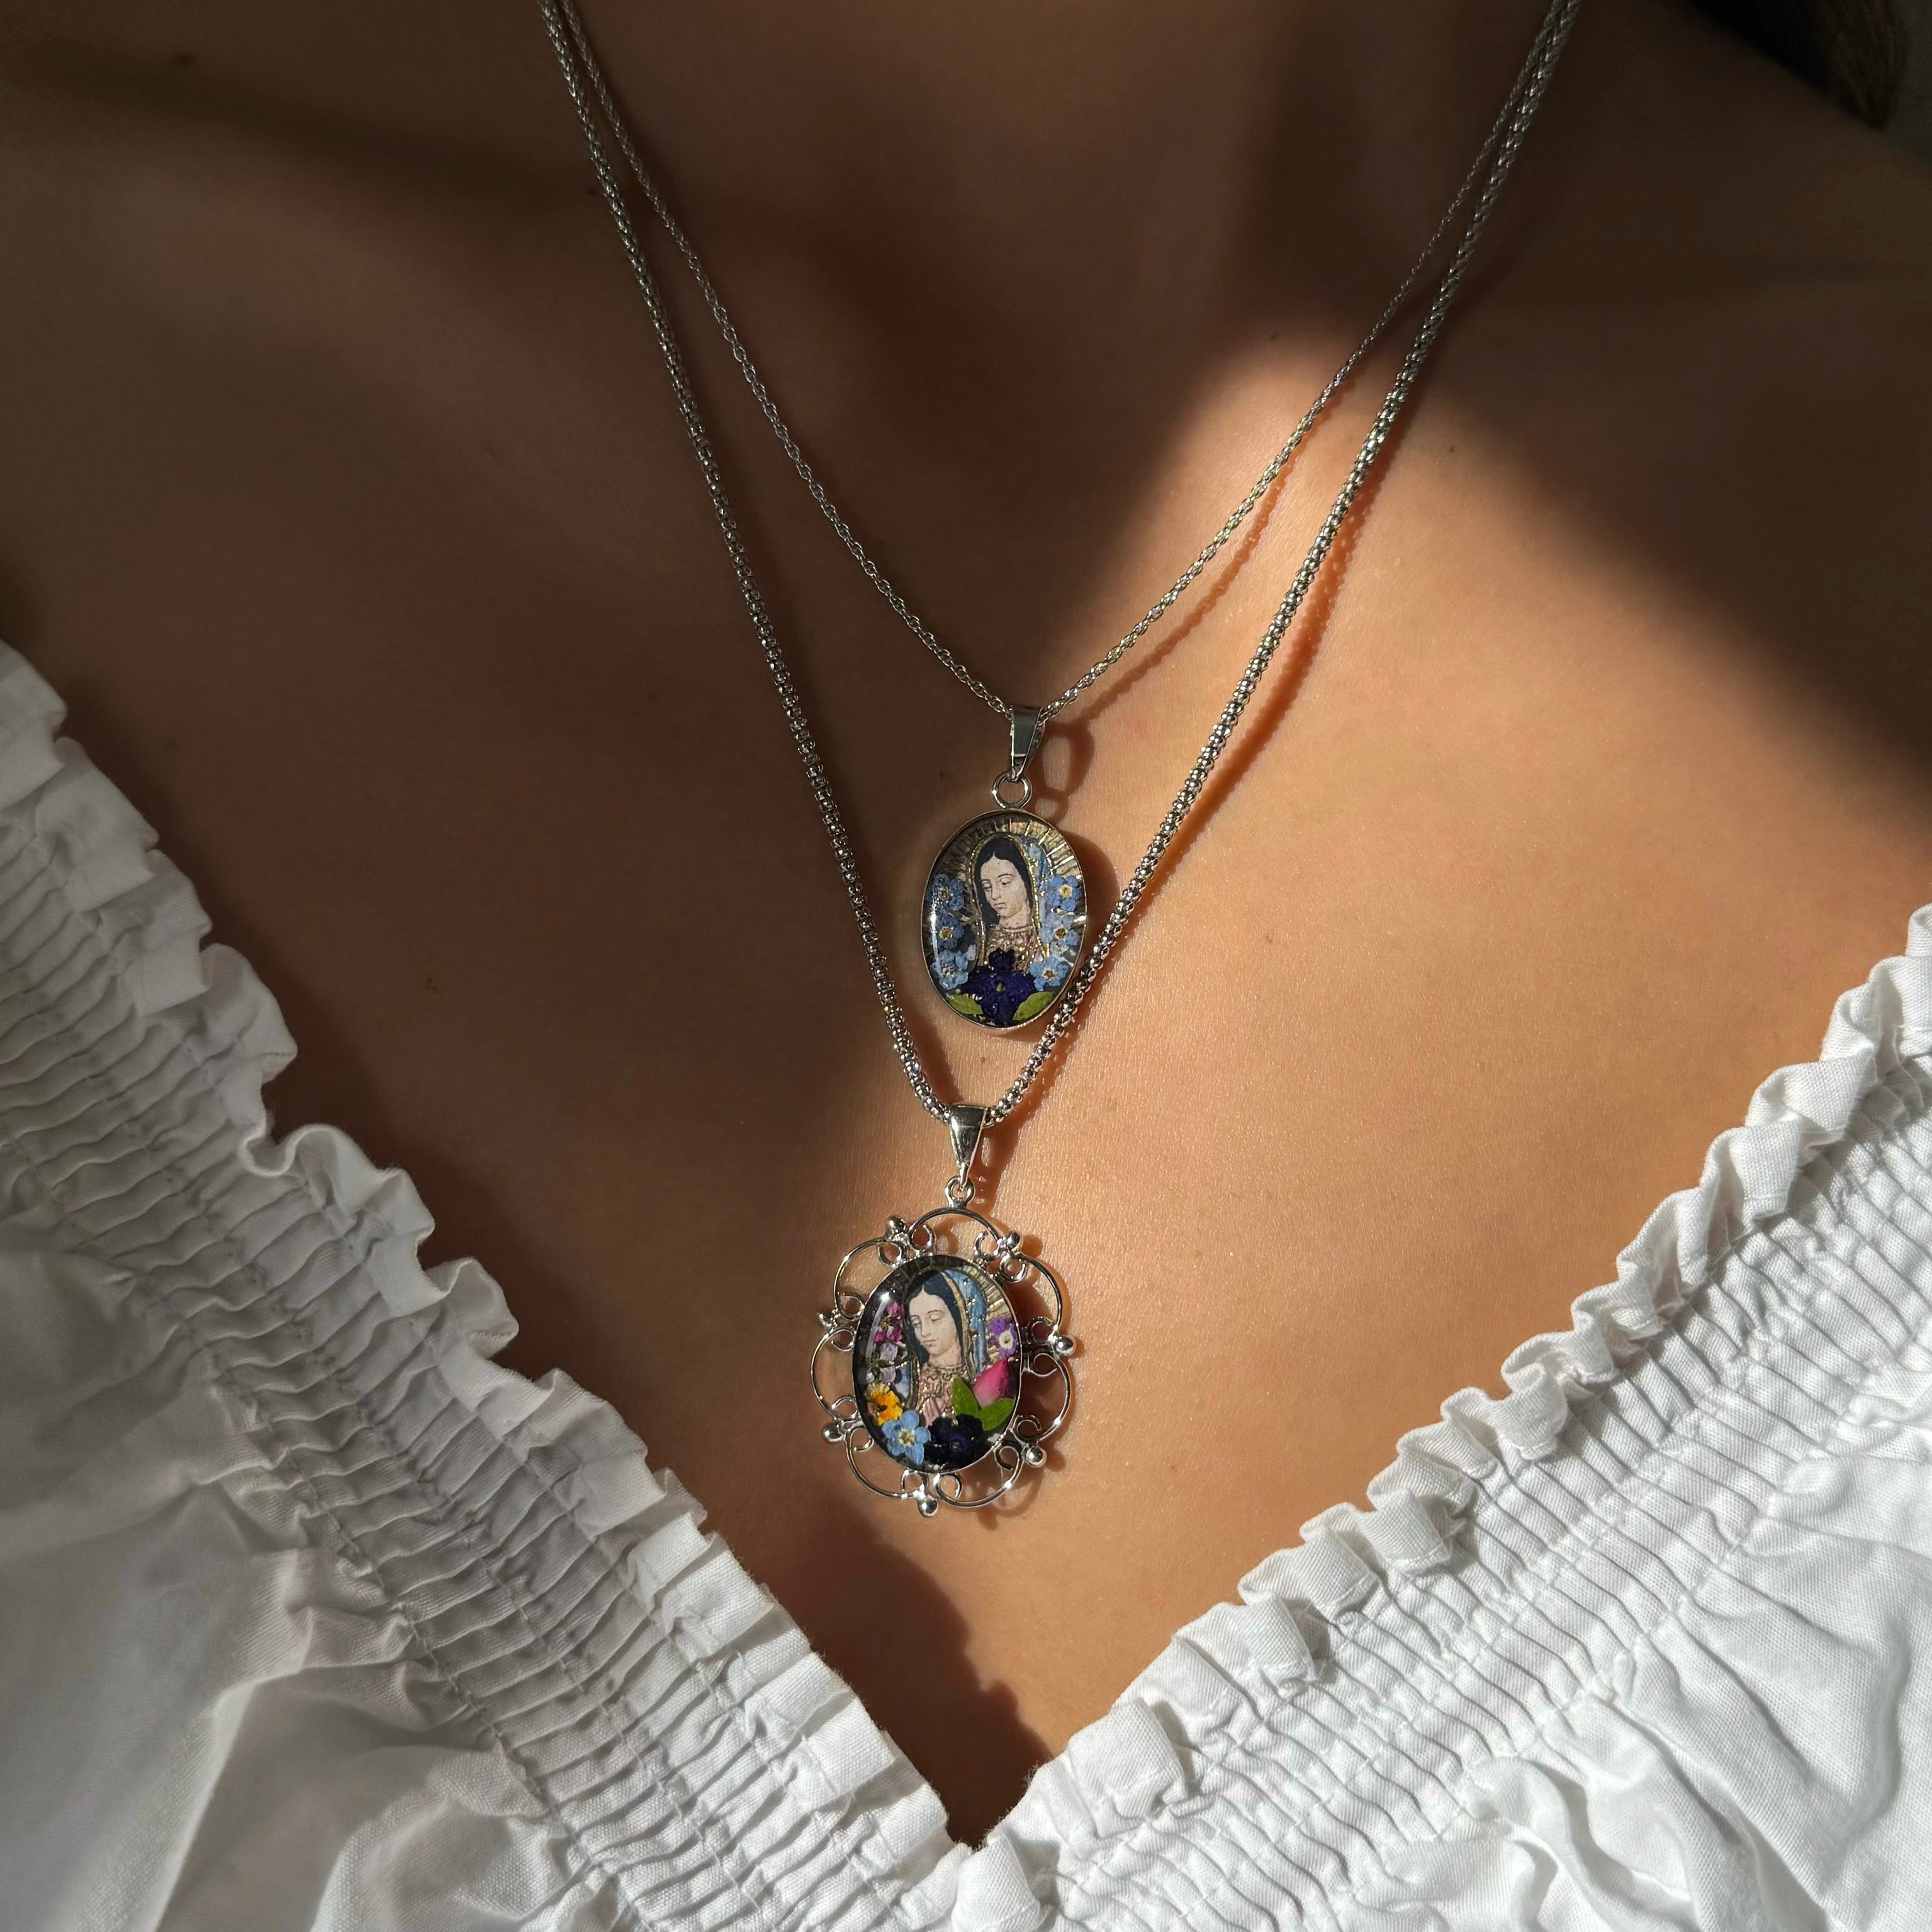 Double Sided Guadalupe Necklace